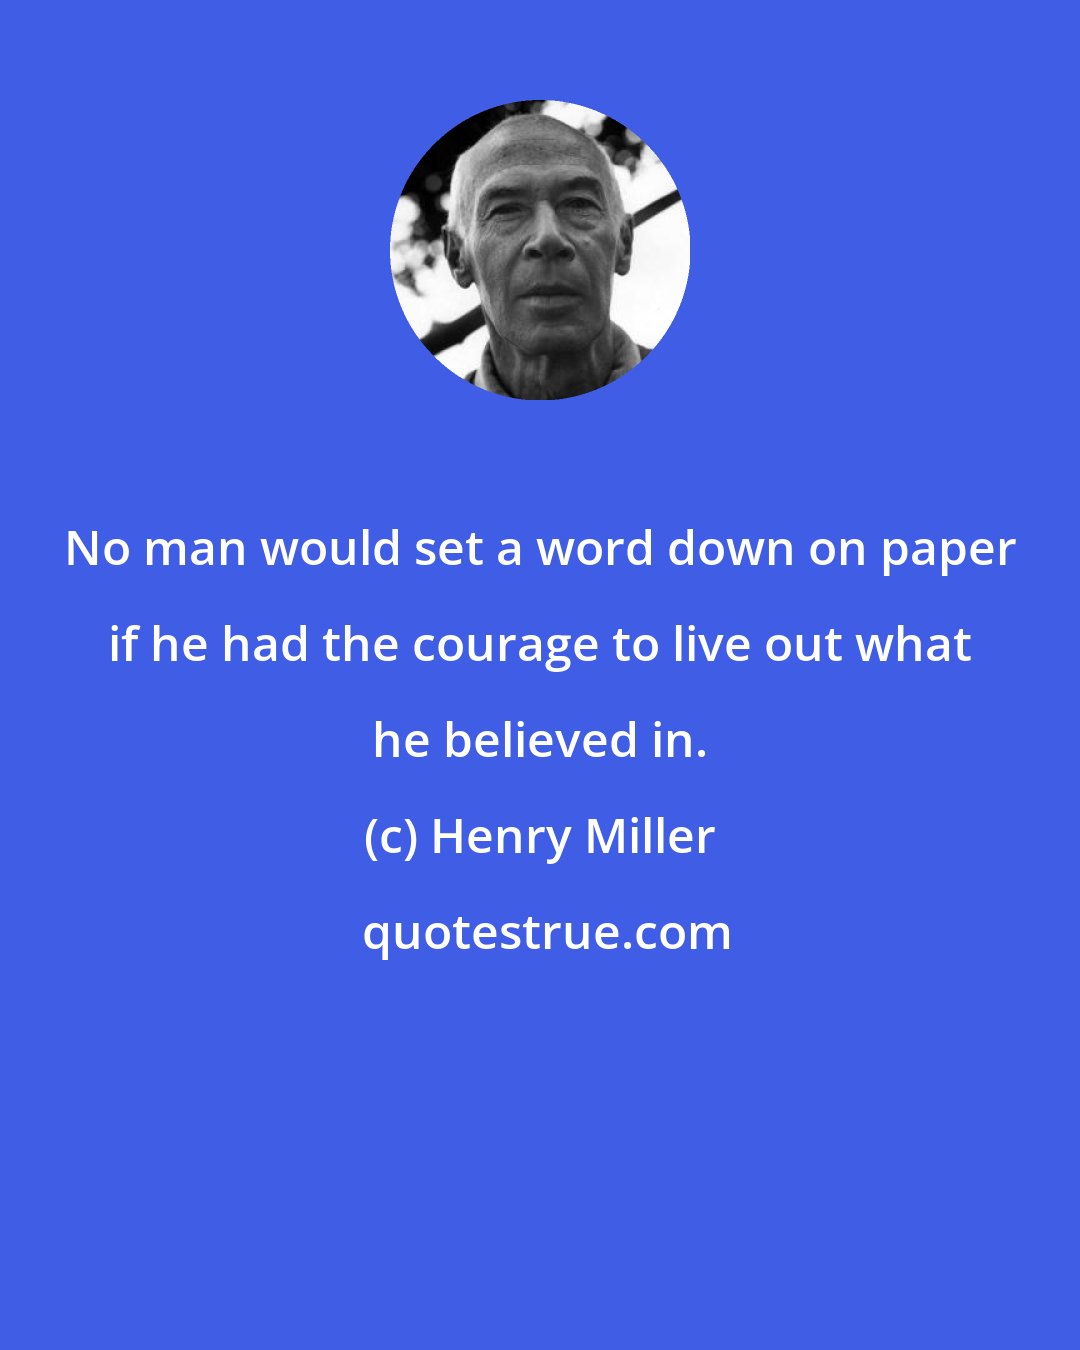 Henry Miller: No man would set a word down on paper if he had the courage to live out what he believed in.